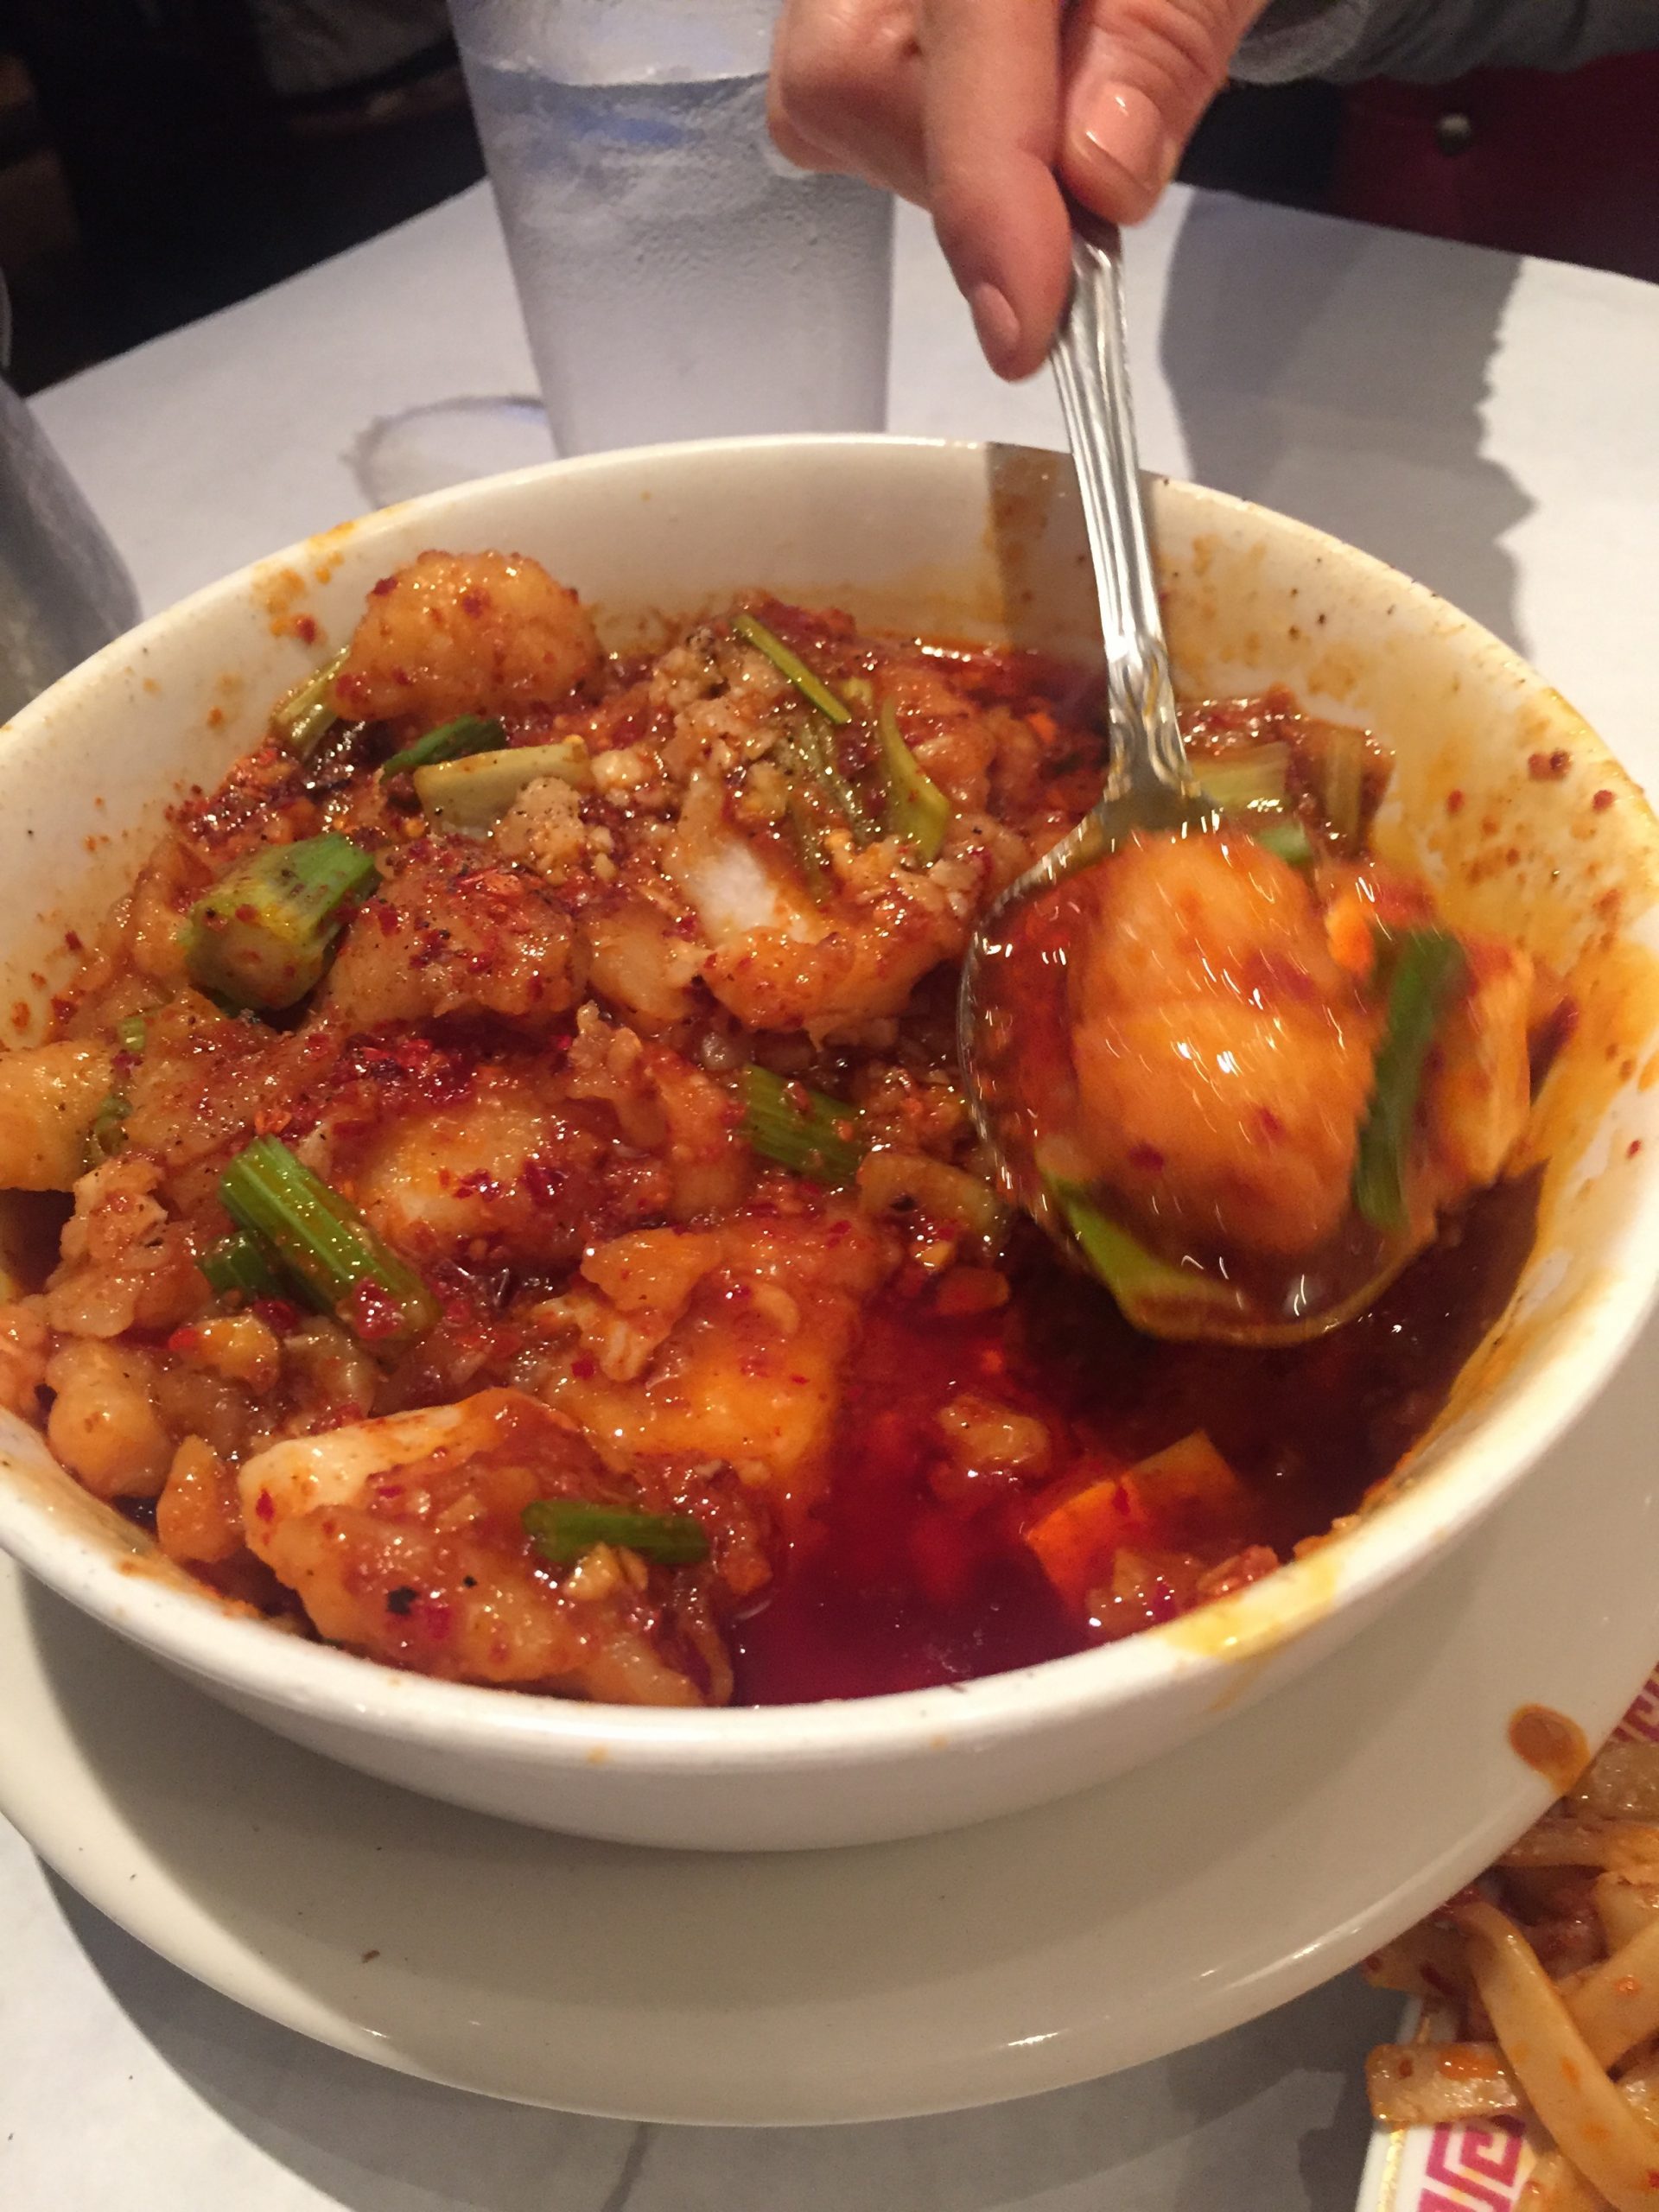 Chiang's Gourmet - Best Chinese Food in Seattle? - Seattle Unexplored